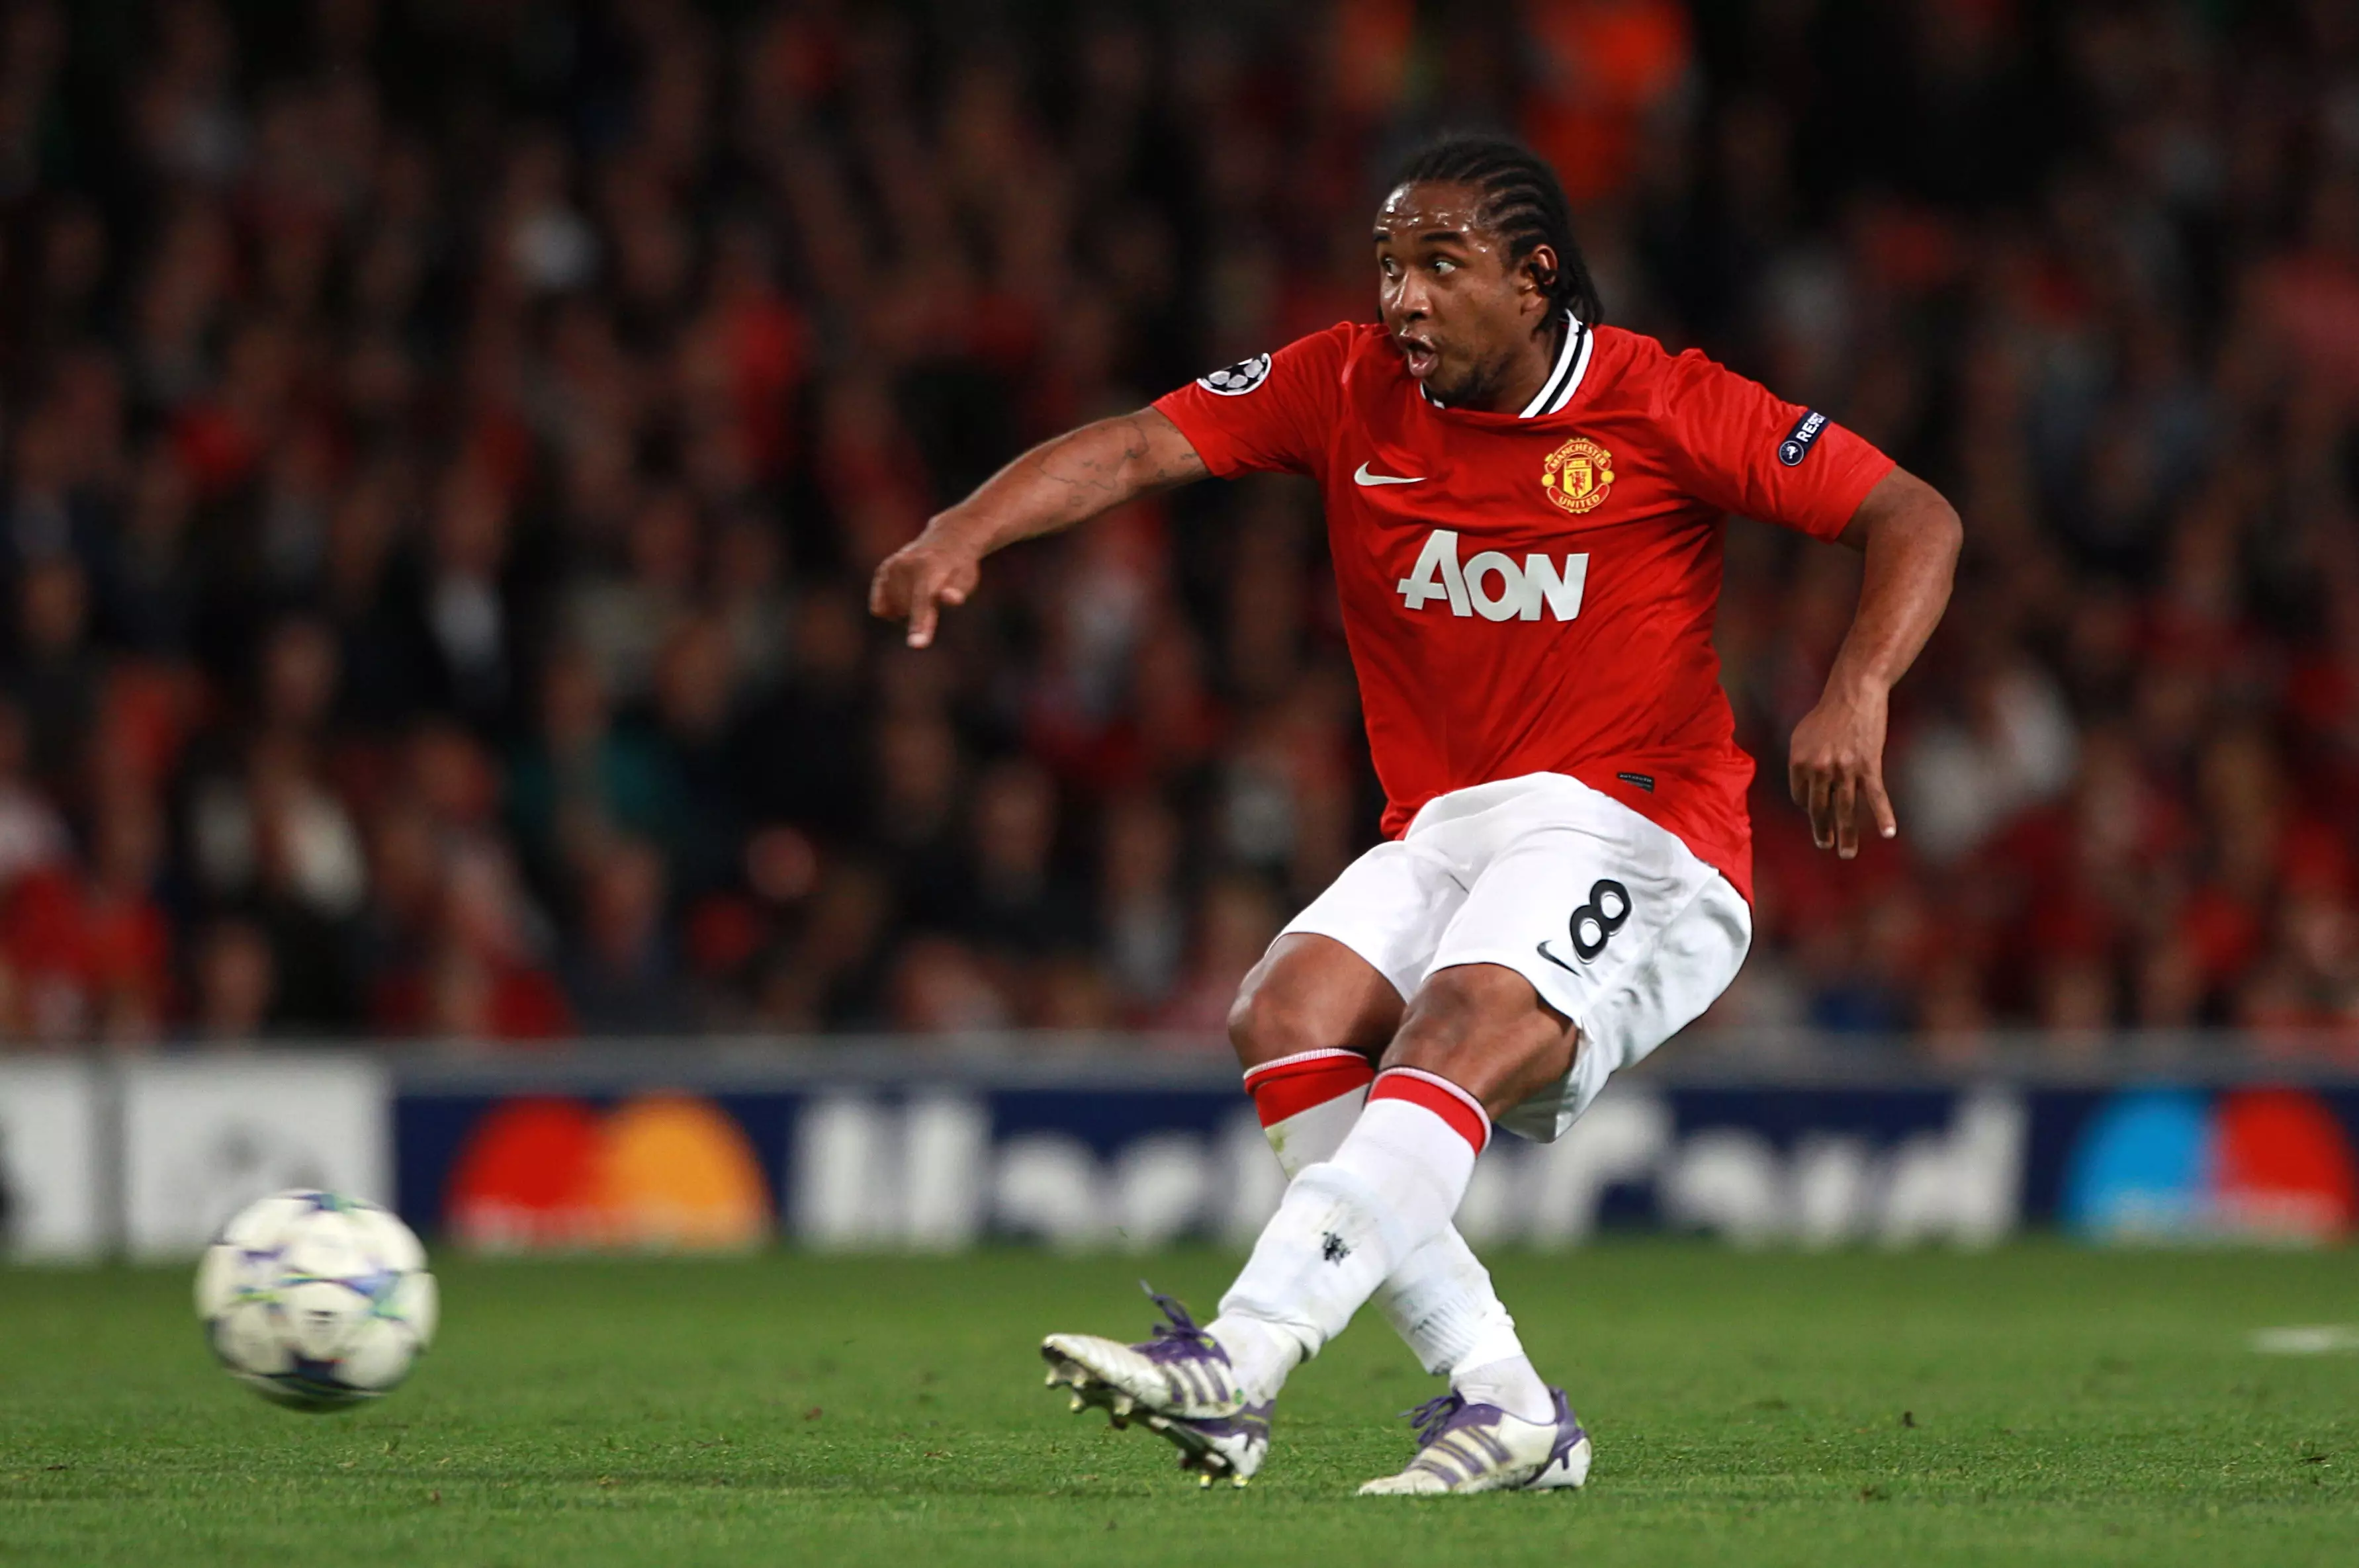 Anderson in action for United. Image: PA